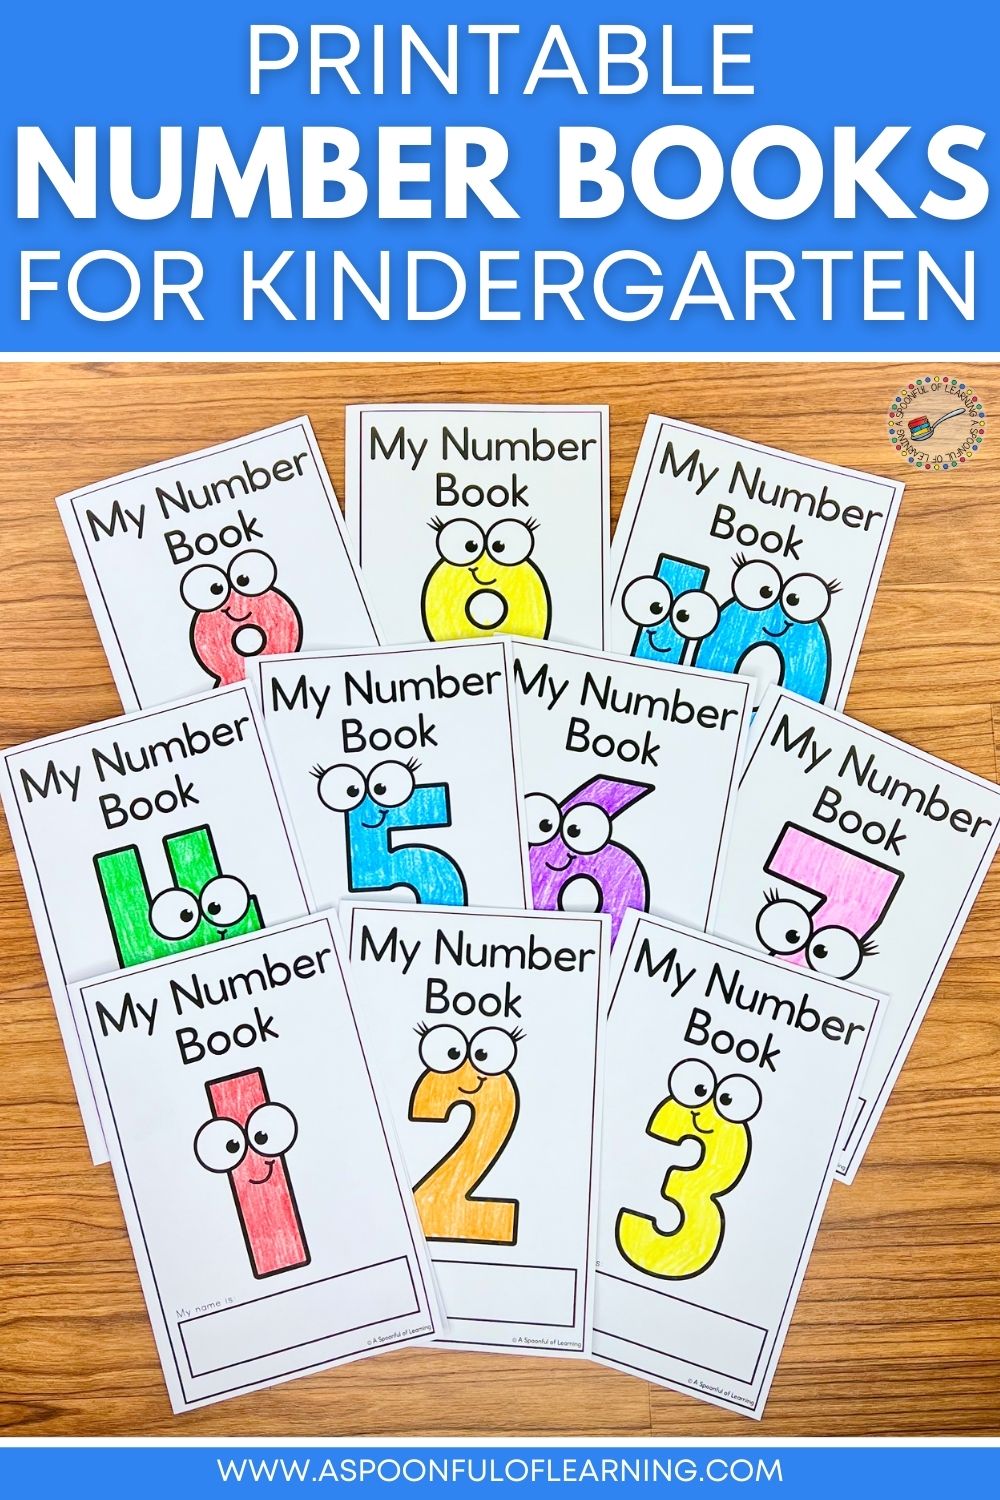 printable-number-books-for-kindergarten-a-spoonful-of-learning